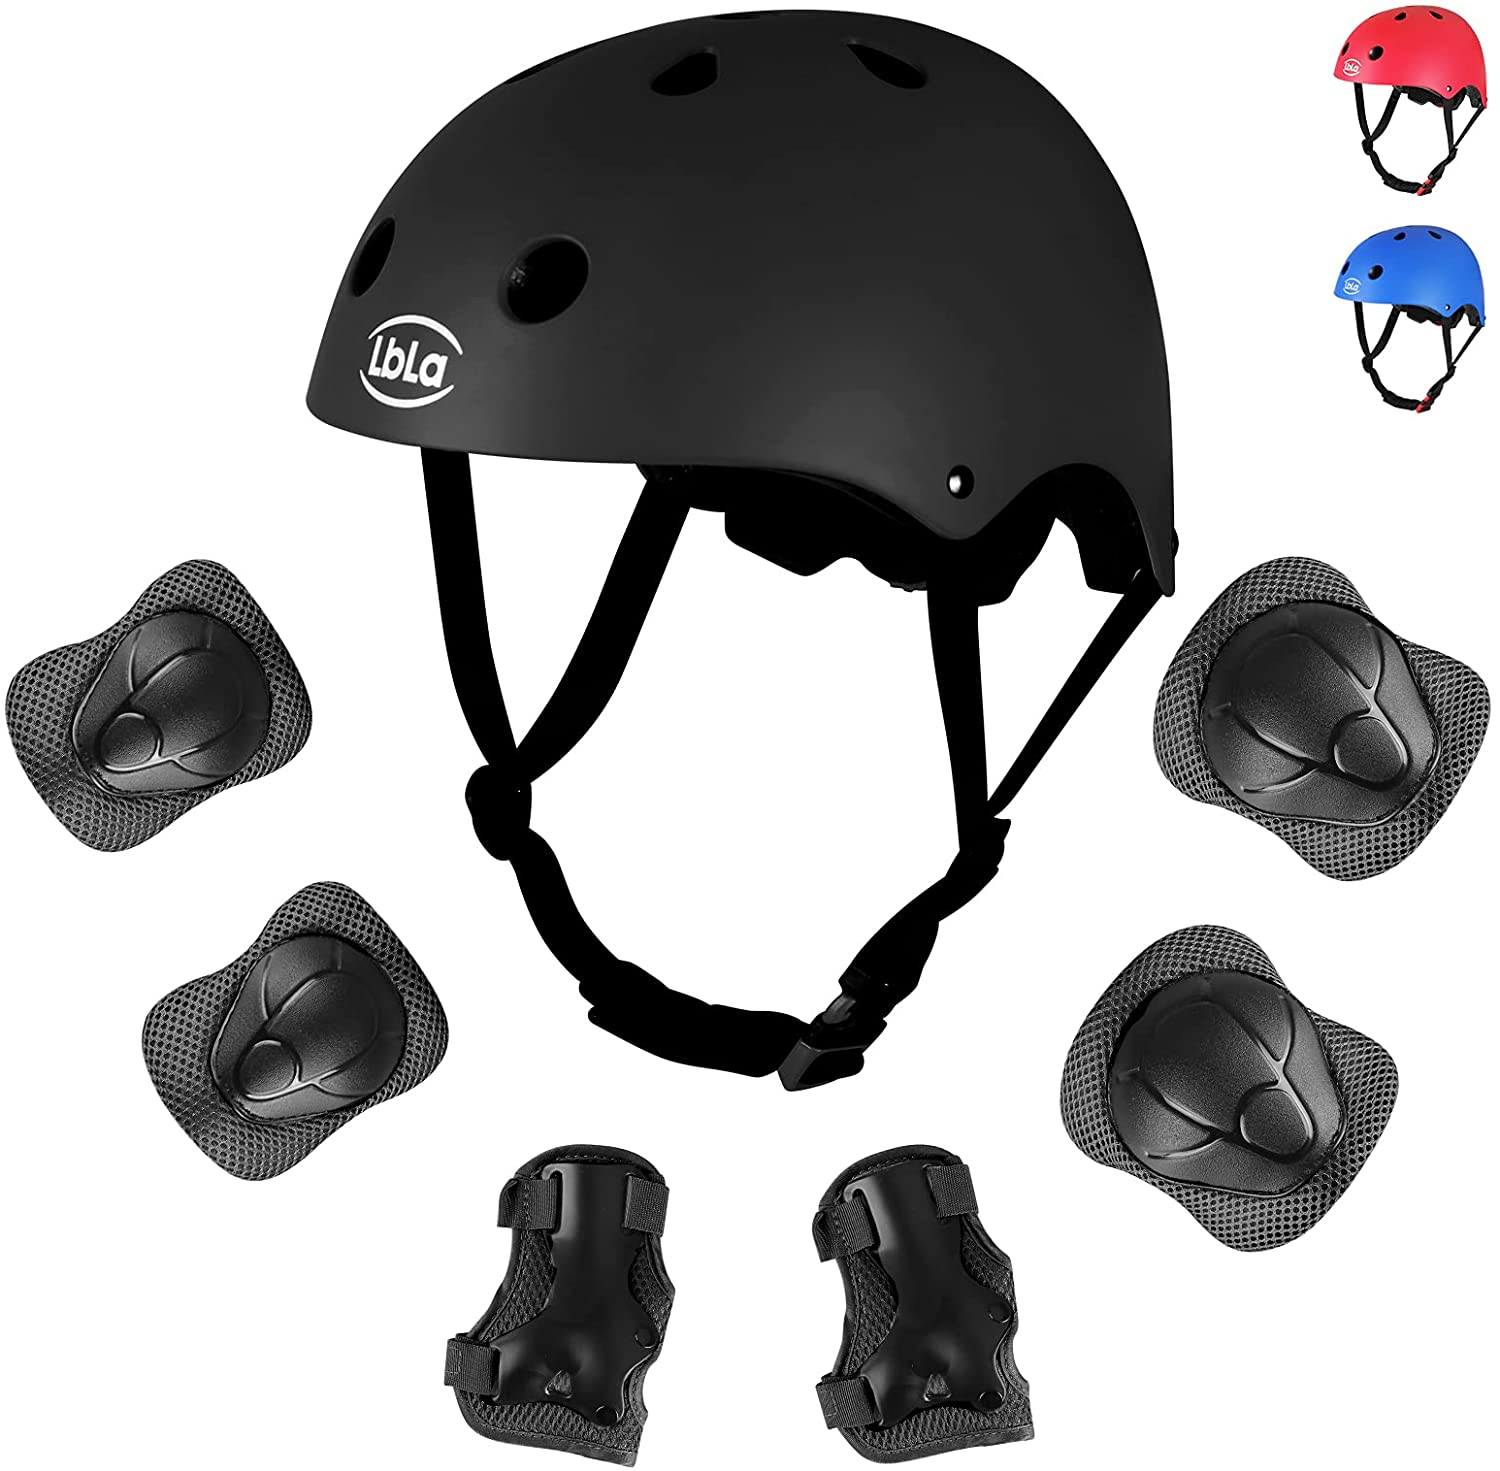 One of Hottest for Four Wheel Scooter Kid - LBLA Kids Bike Skateboard Helmet,Helmet and Pads Protect Head Knee Elbow and Wrist,7 Pcs Adjustable Protective Gear Set for 3-8 Years Kids Boys and Girl...